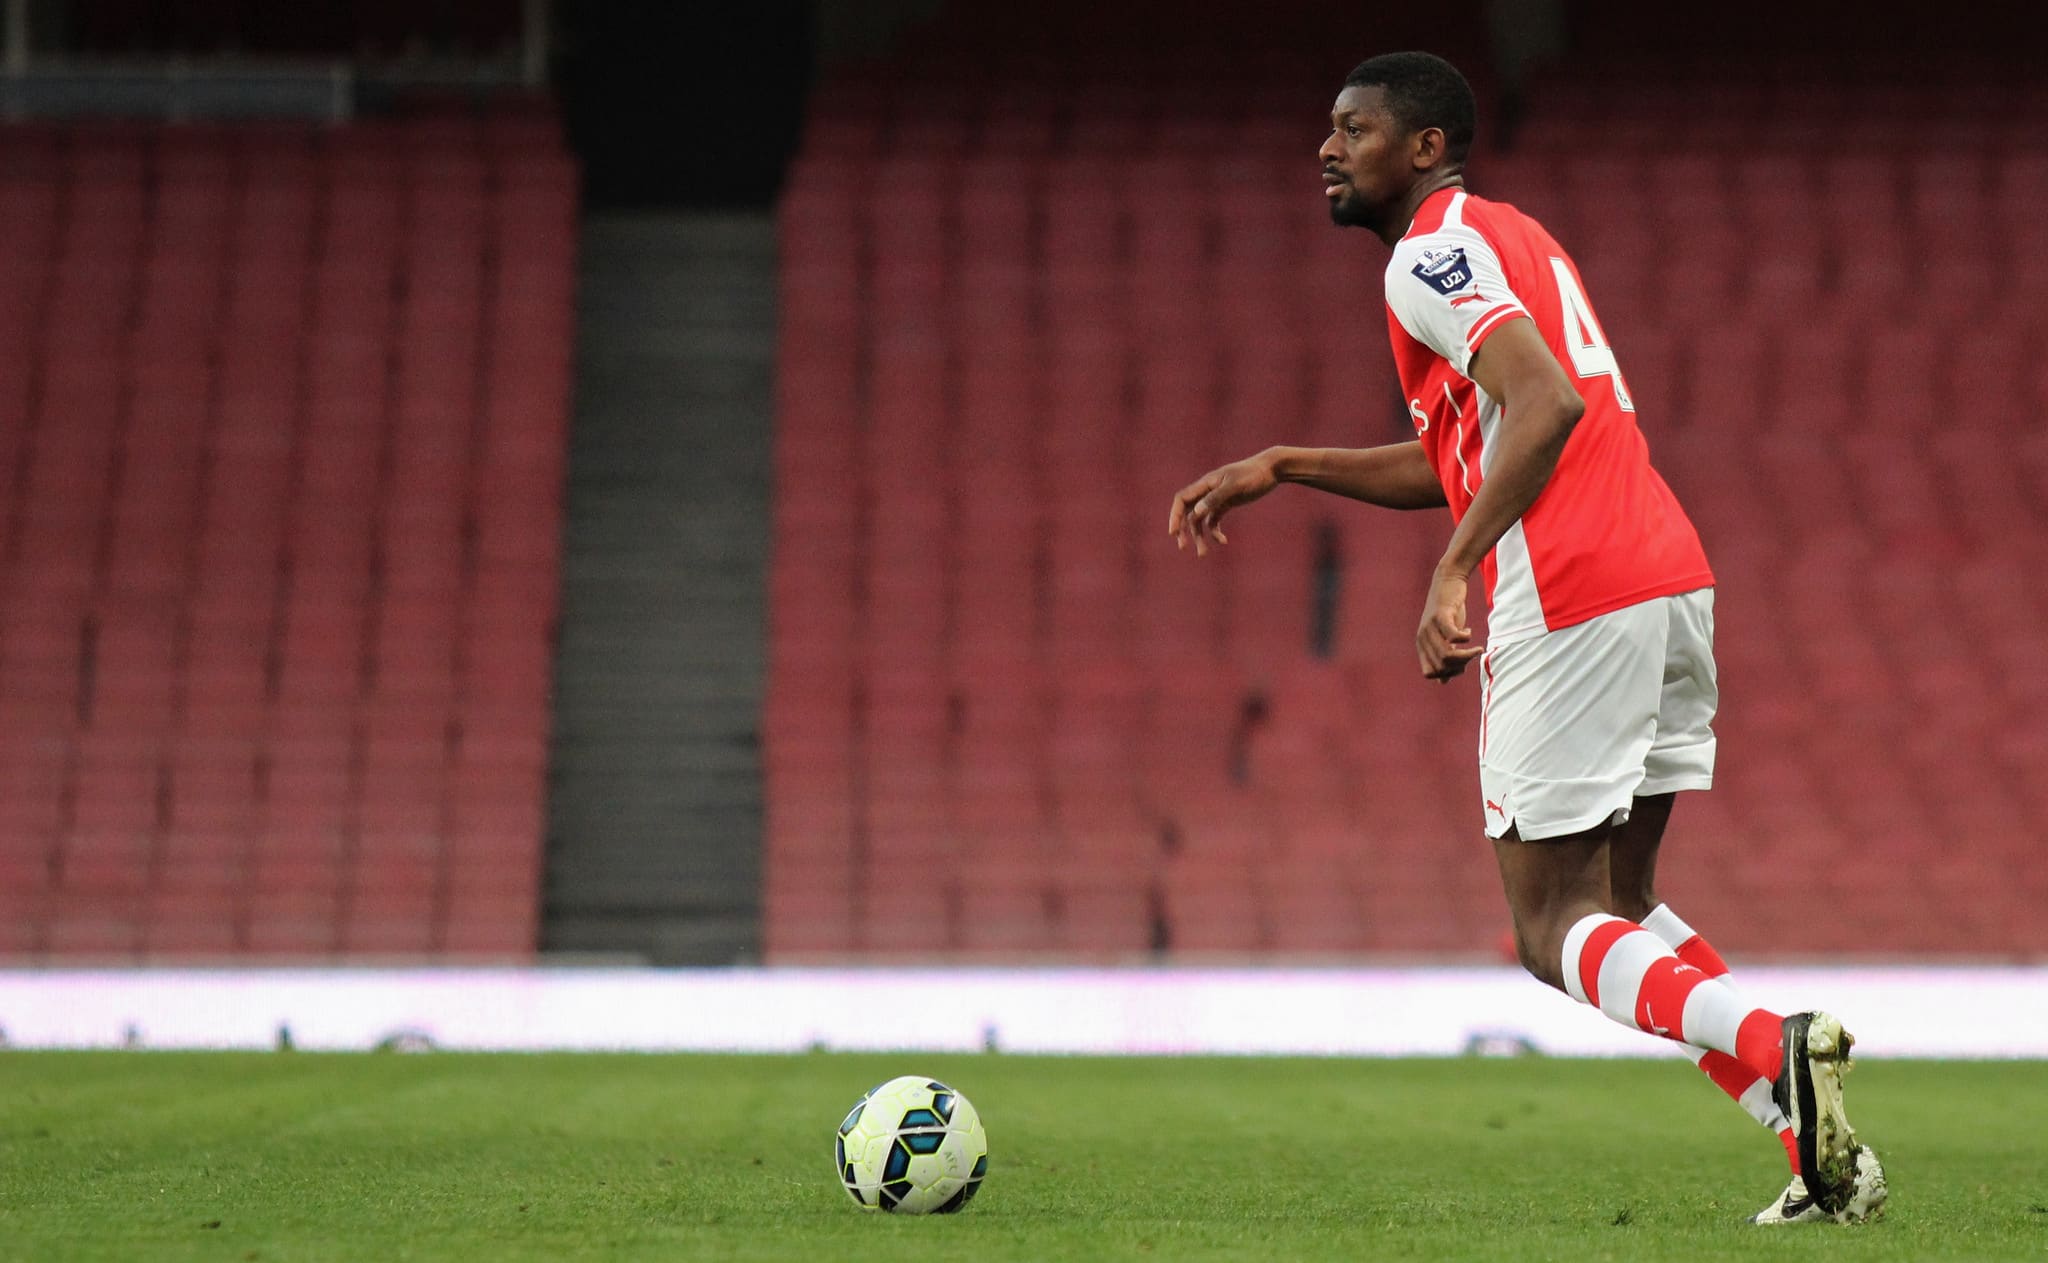 Three reasons Abou Diaby flopped at Arsenal